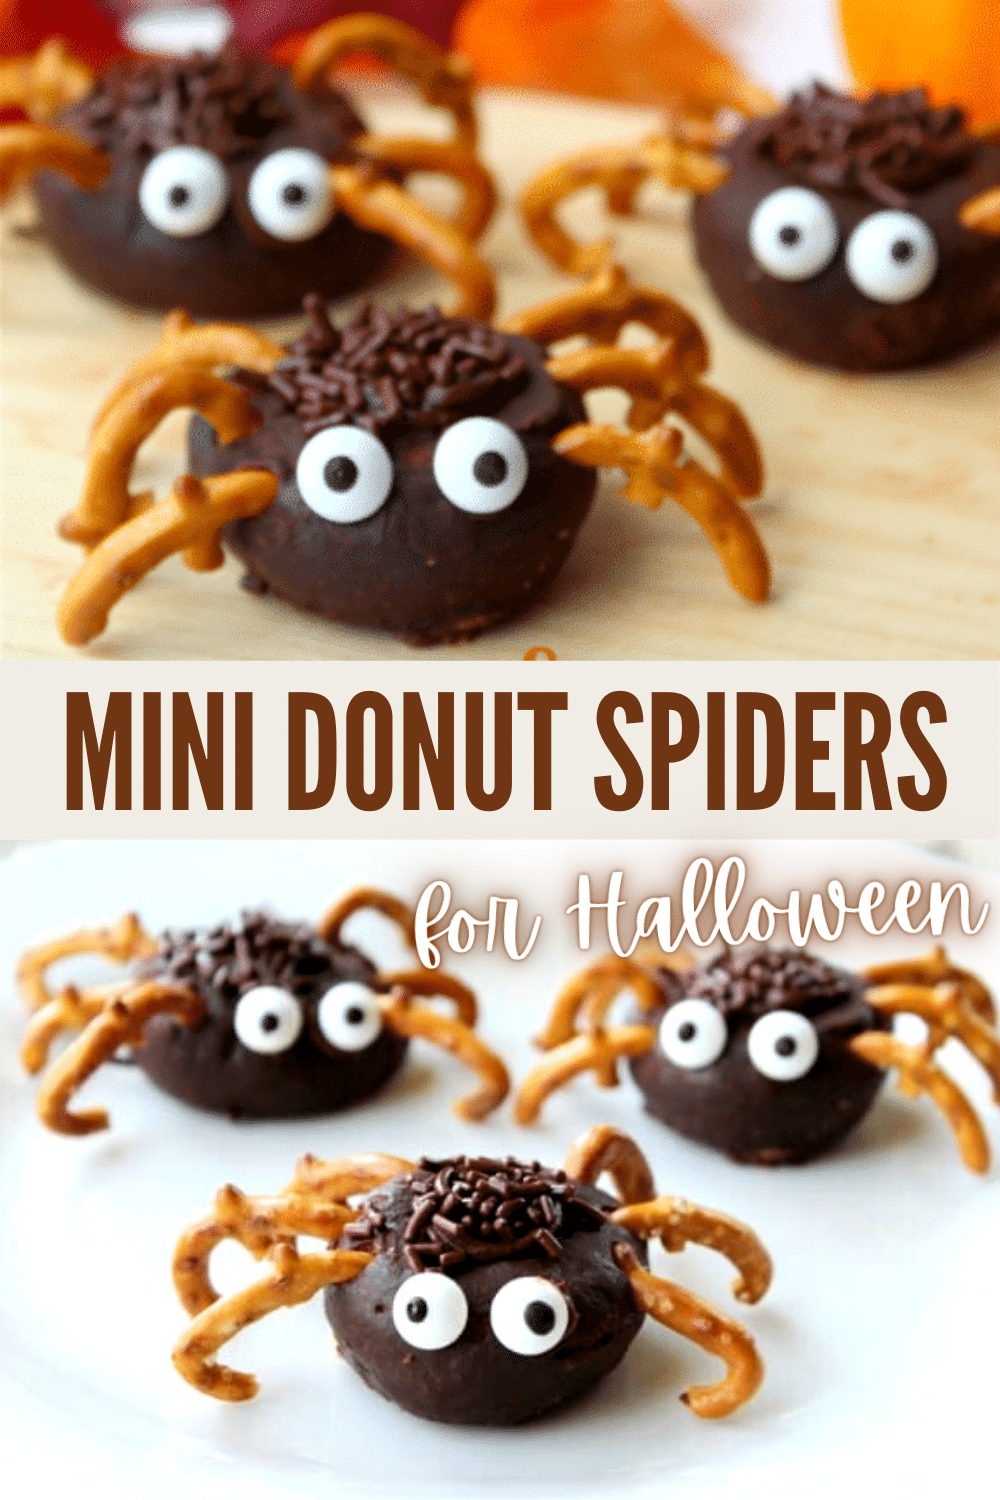 Such a fun and easy Halloween treat idea! This tutorial shows you how to make a spider using mini donuts and pretzels in just minutes. #funfood #Halloween #spidertreats #minidonuts via @wondermomwannab